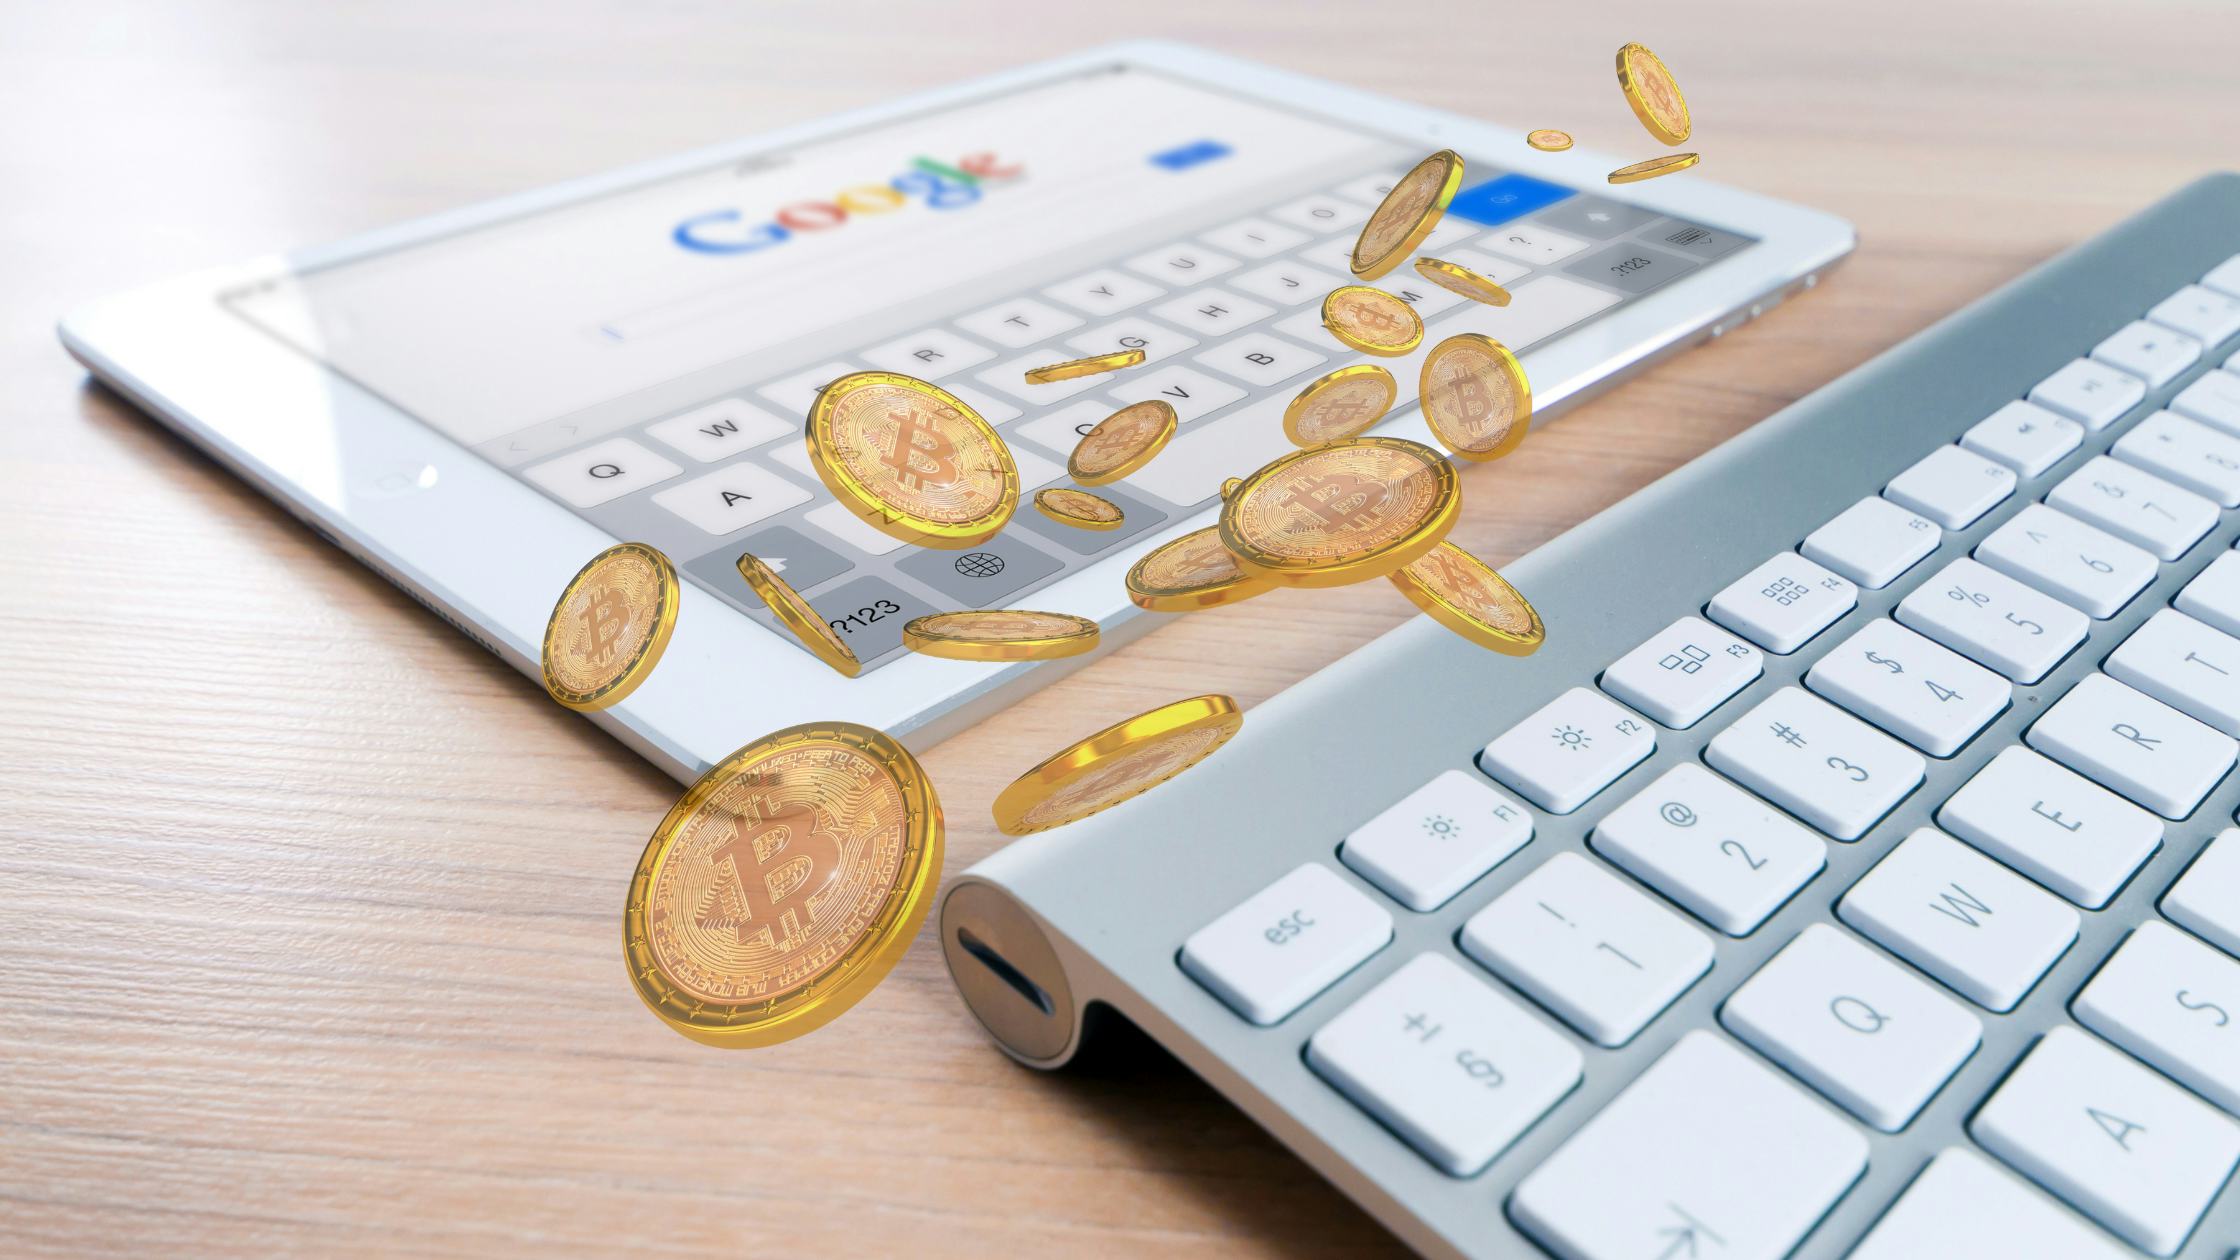 'Bitcoin Is Dead' Google Searches Skyrocket, Bitcoin Obituaries Records 15 Deaths This Year